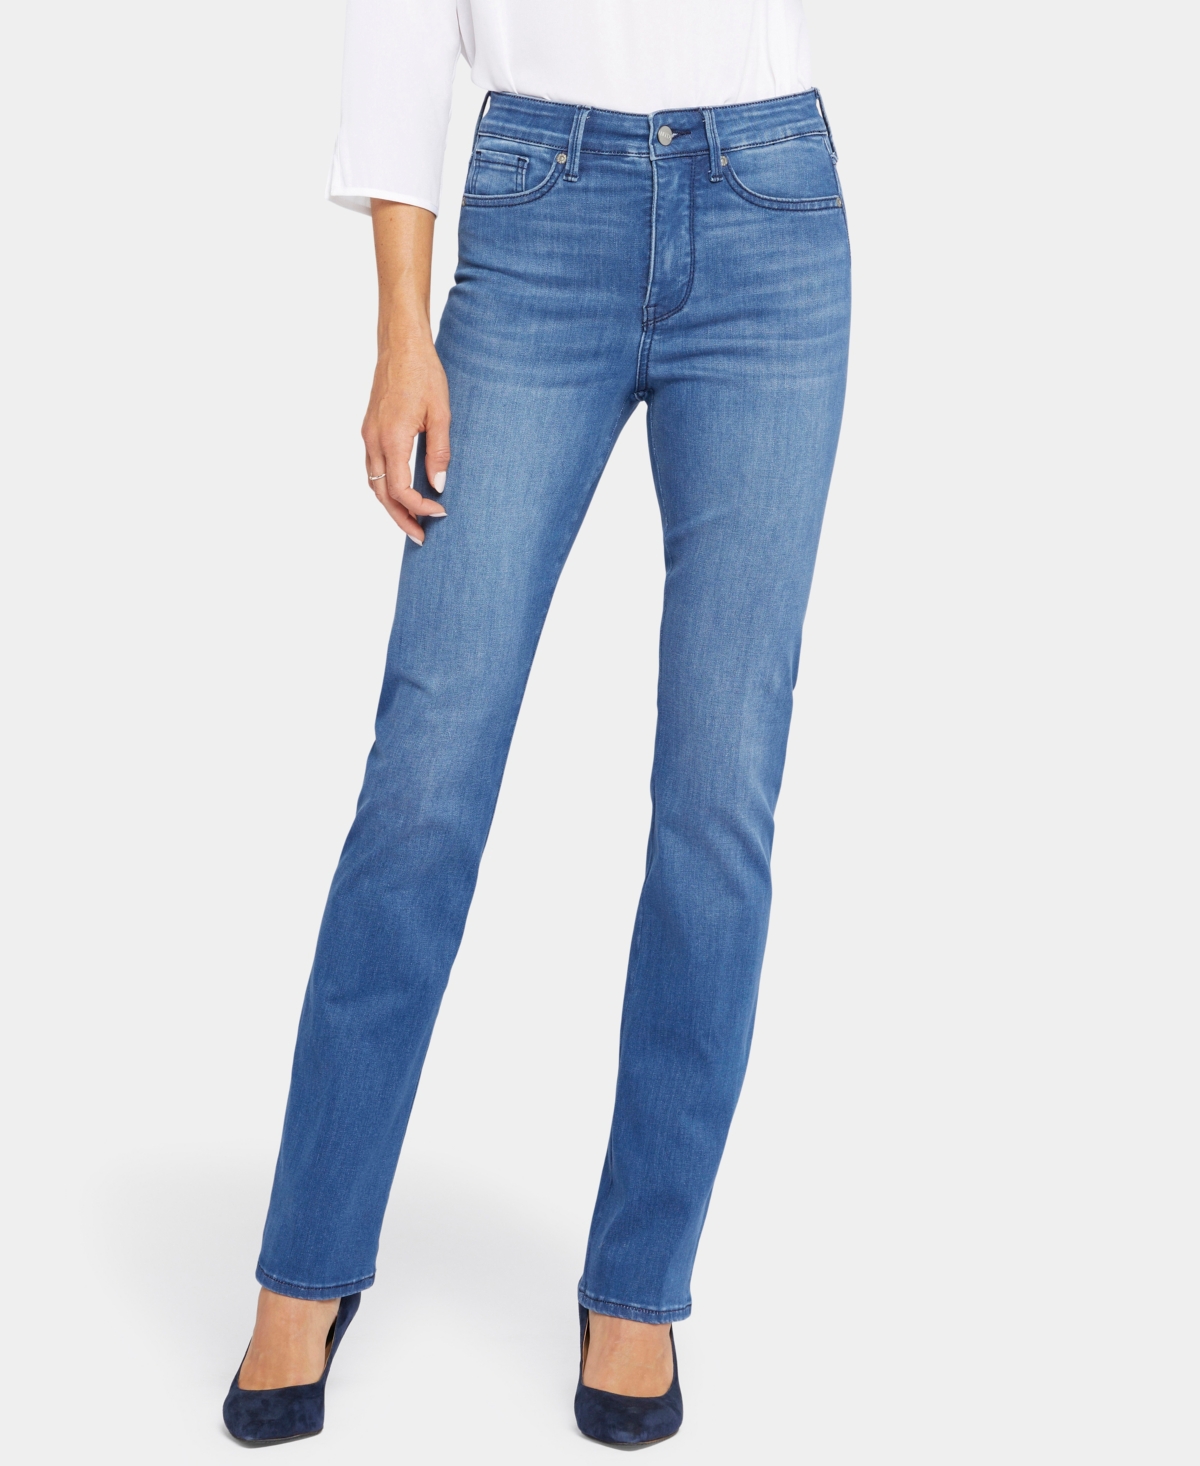 Shop Nydj Women's Le Silhouette High Rise Slim Bootcut Jeans In Amour